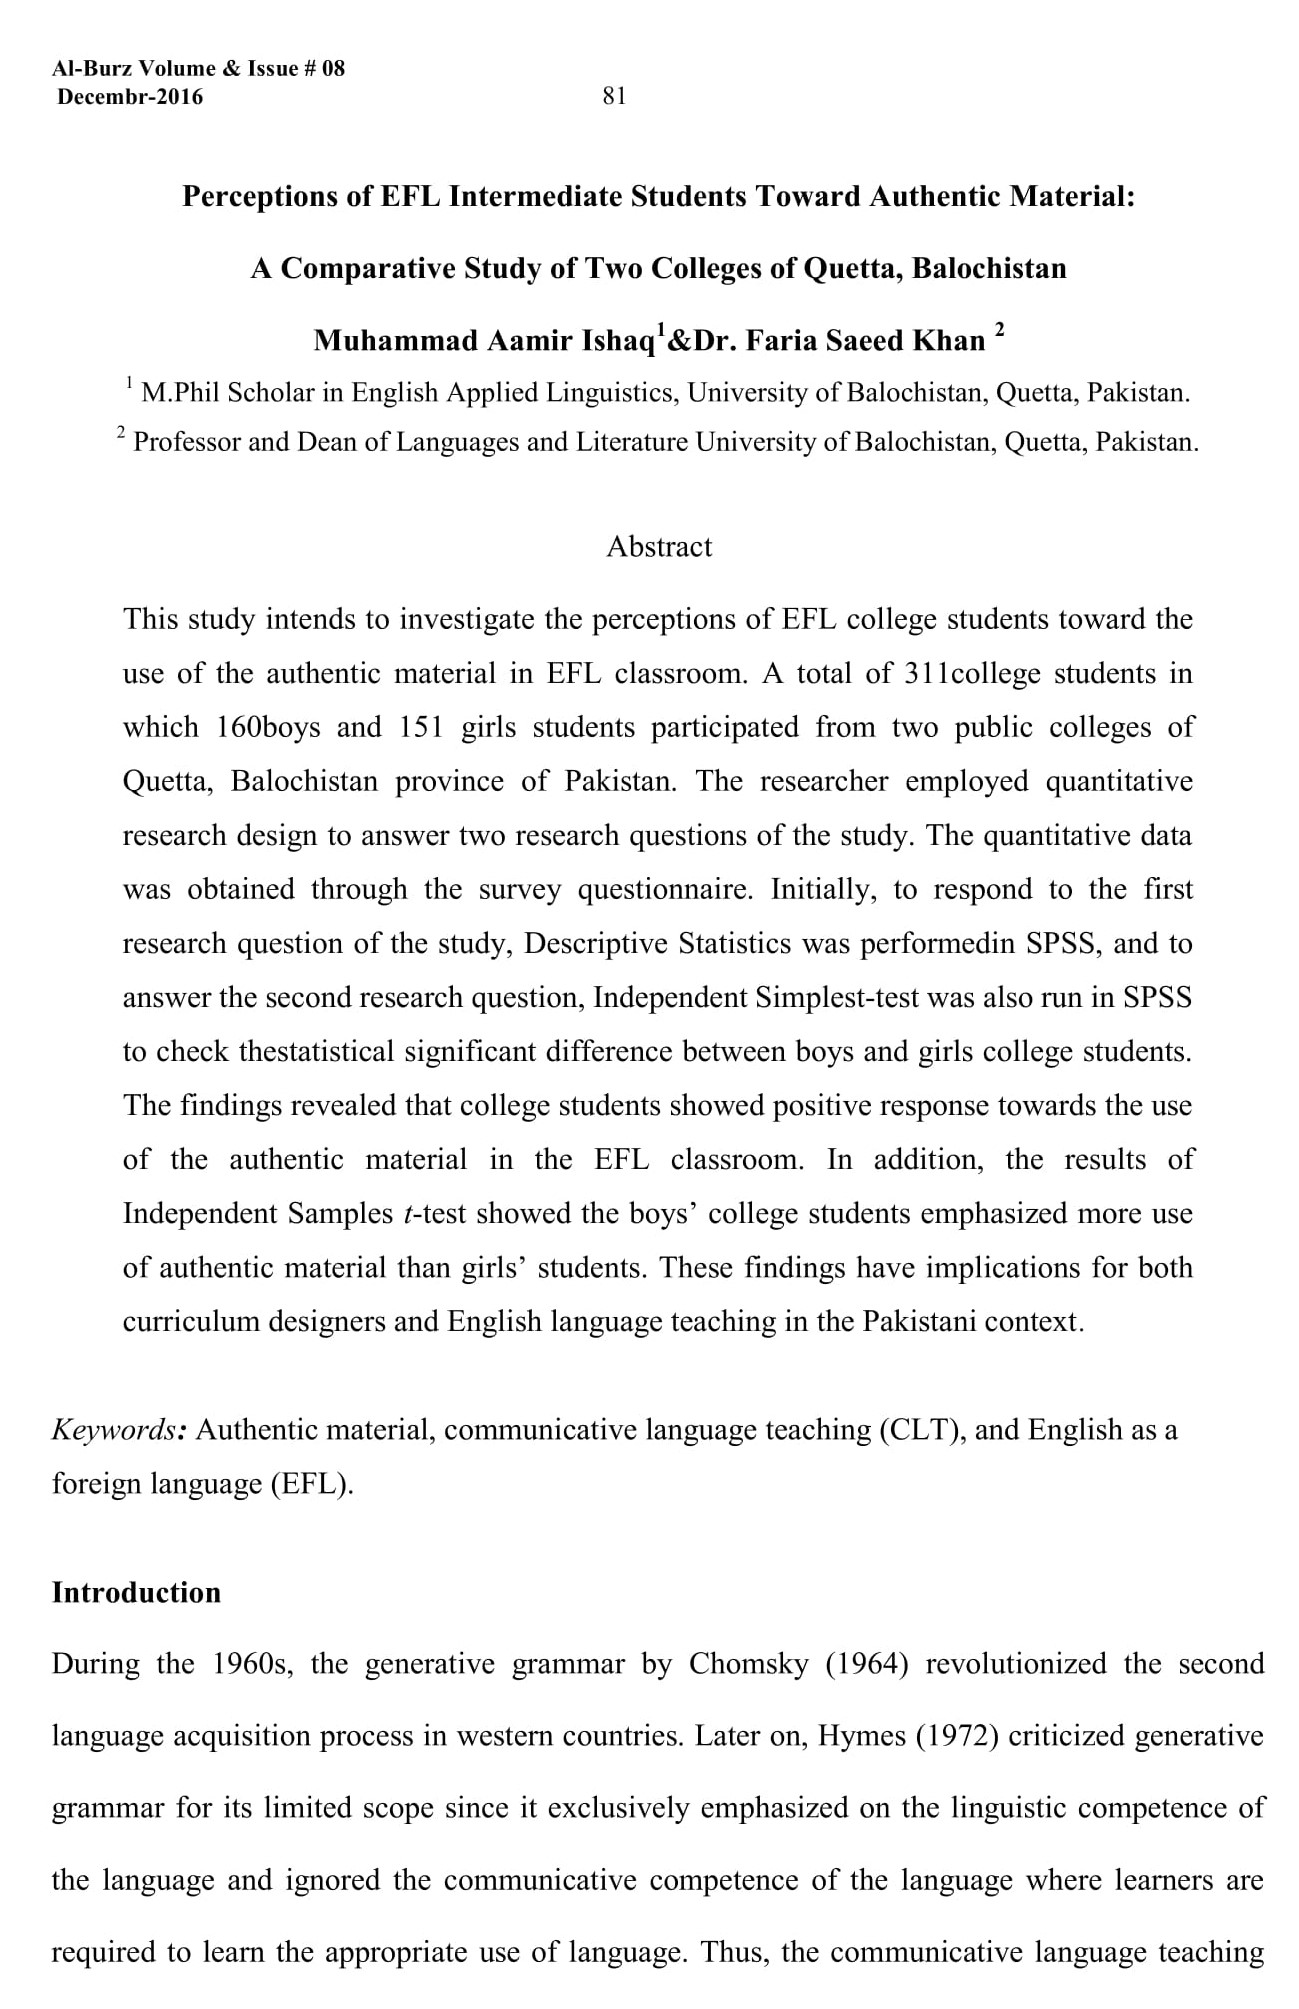 Perceptions of EFL Intermediate Students Toward Authentic Material: A Comparative Study of Two Colleges of Quetta, Balochistan